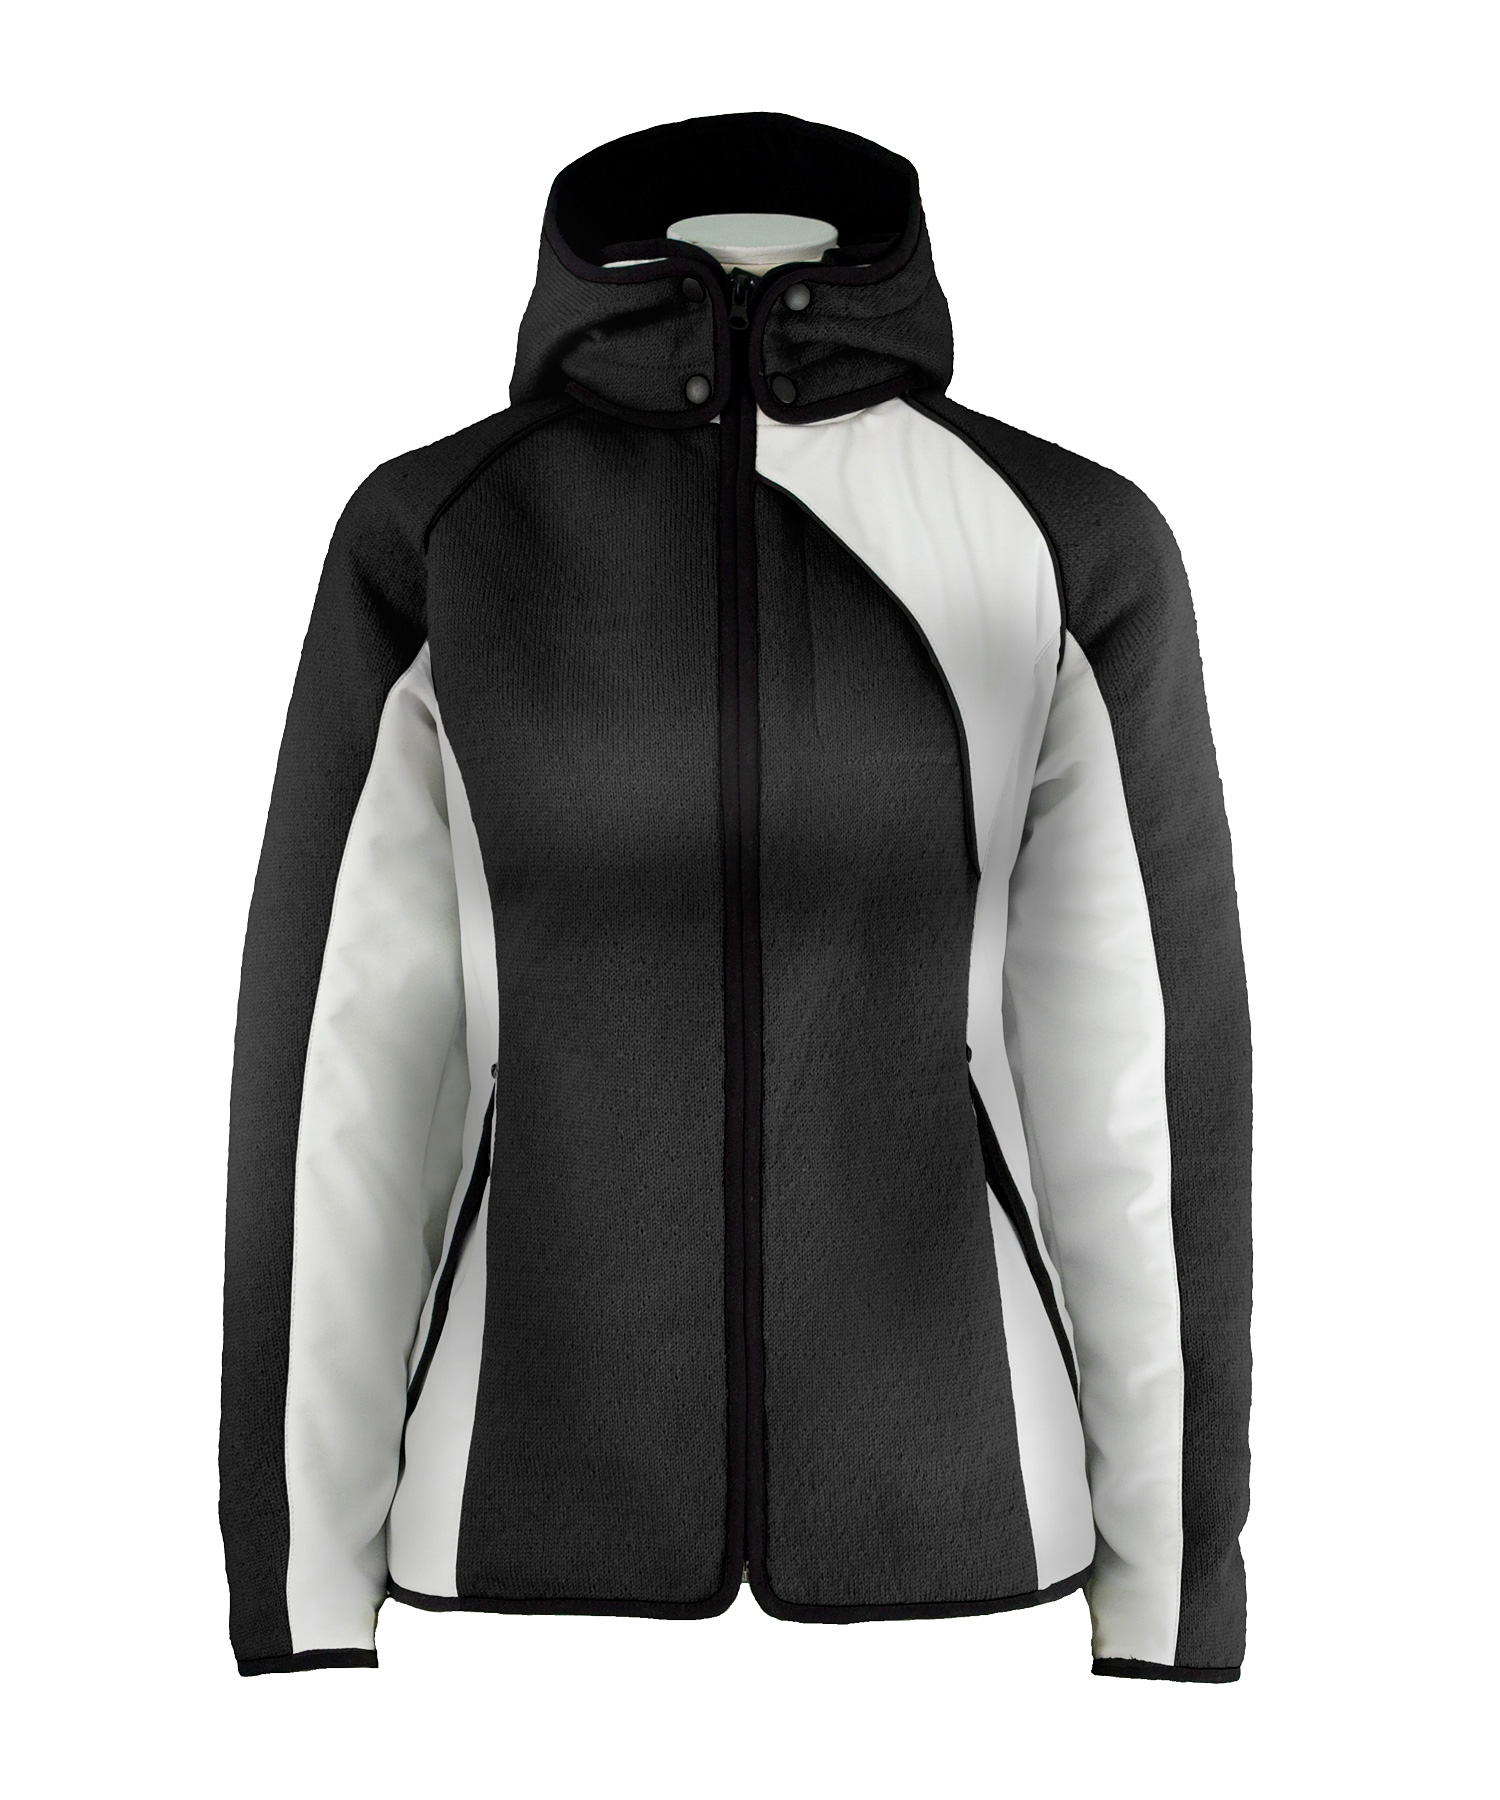 Dale of Norway Val Gardena Knitshell Jacket Women\'s at NorwaySports.com  Archive